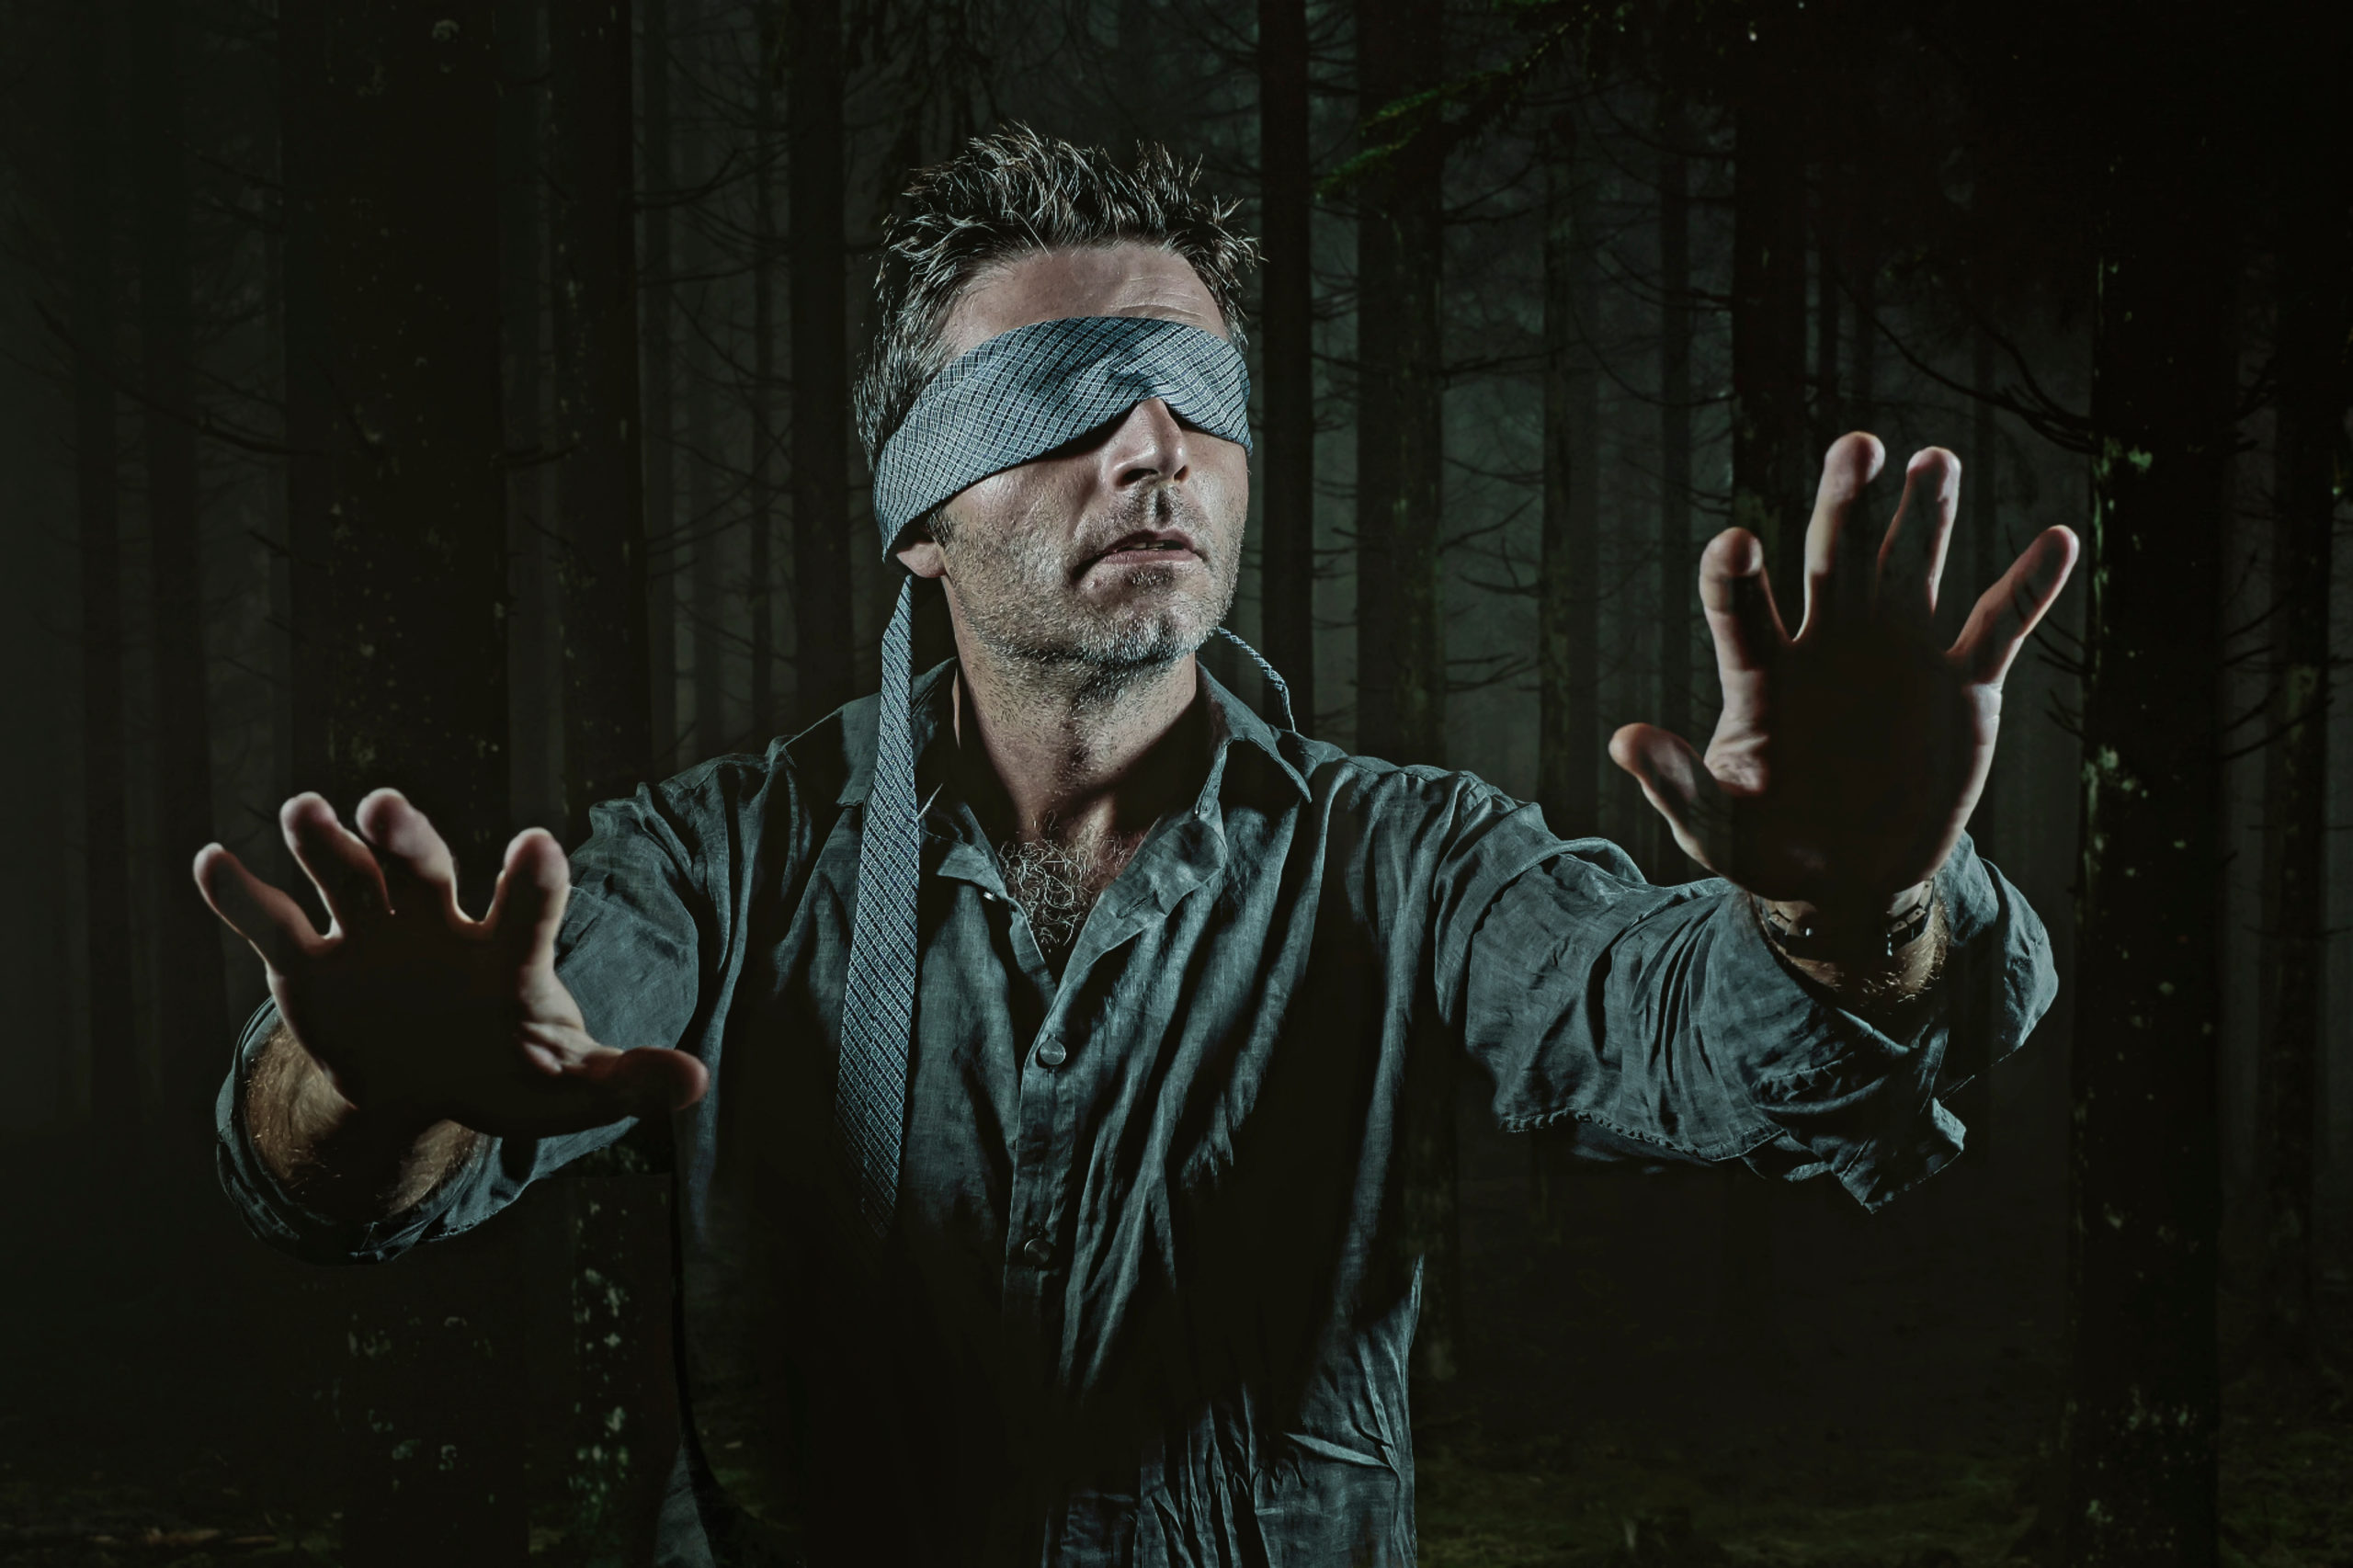 Young Confused And Scared Man Blindfolded With Necktie Playing Internet Trend Dangerous Viral Challenge With Eyes Blind Lost In Dark Forest Background Guided By Intuition By TheVisualsYouNeed Scaled